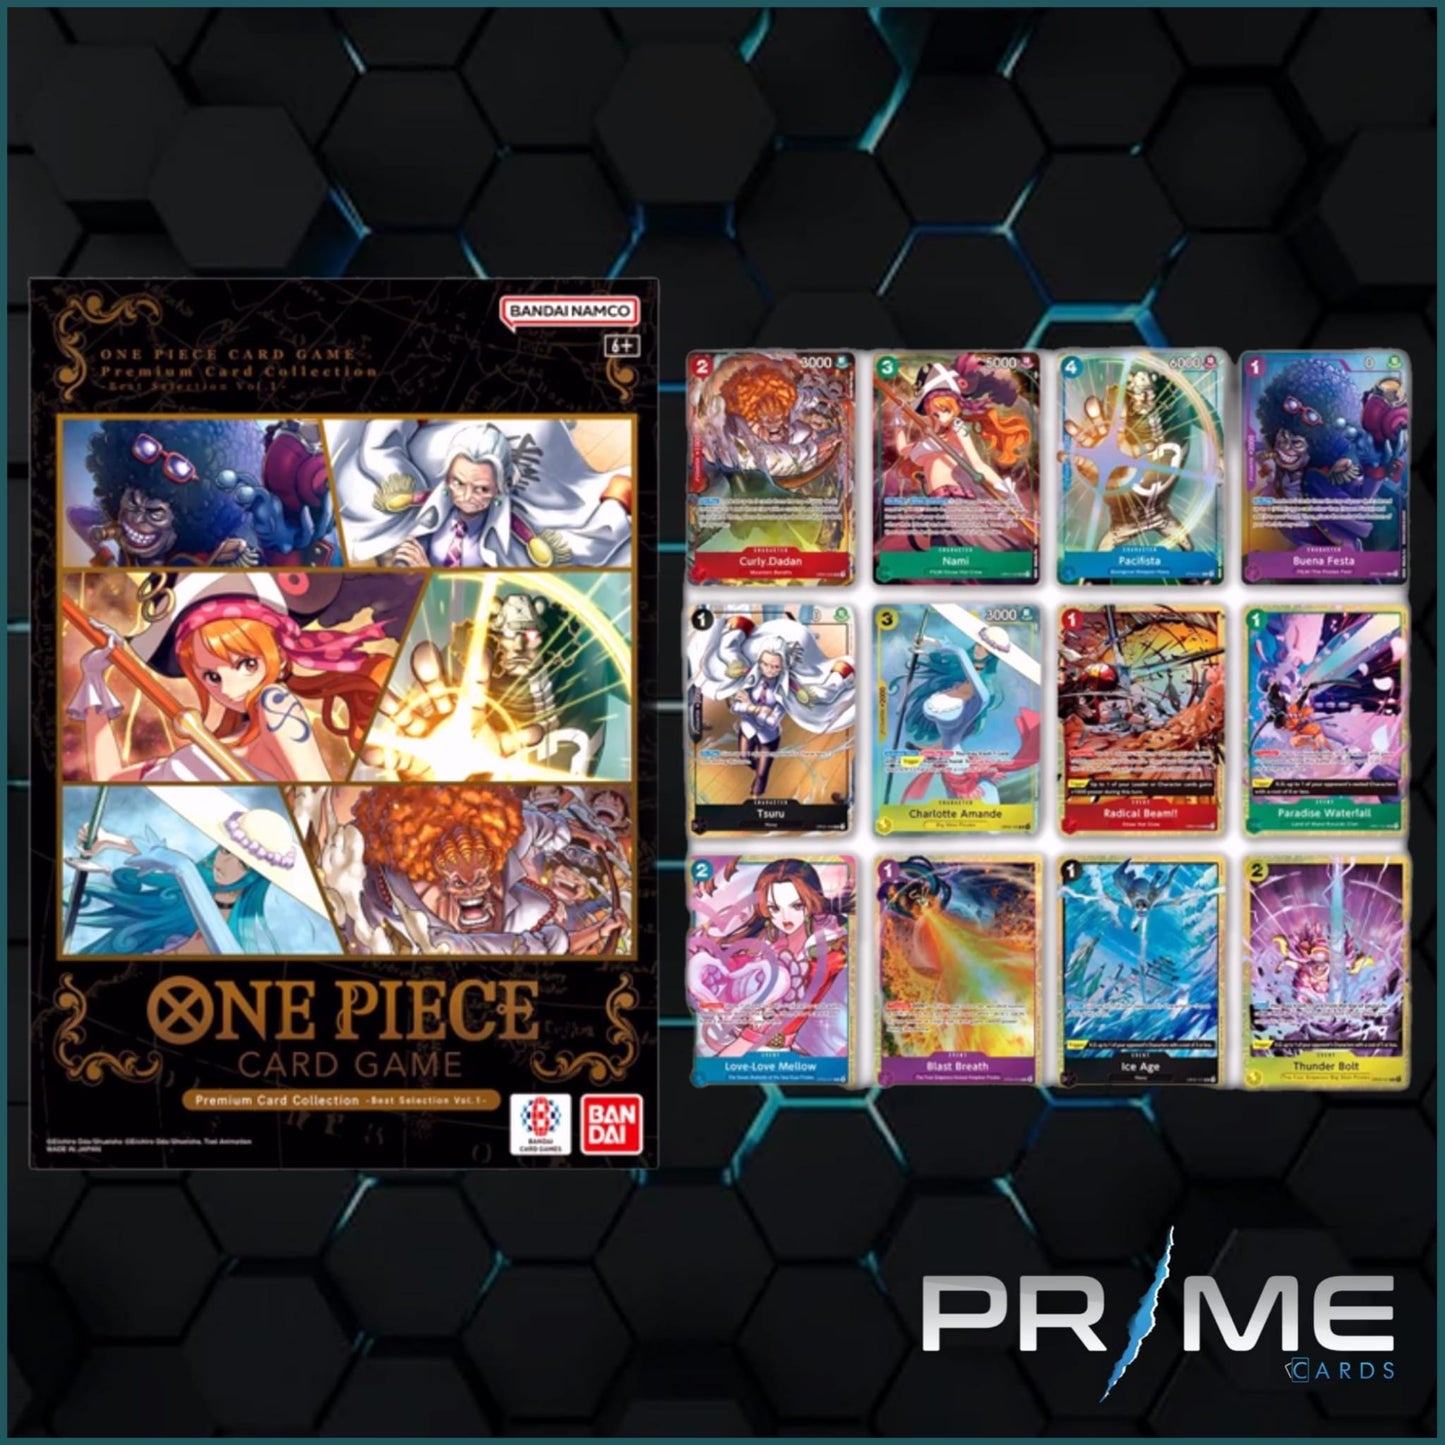 One Piece Card Game: Premium Card Collection - Best Selection